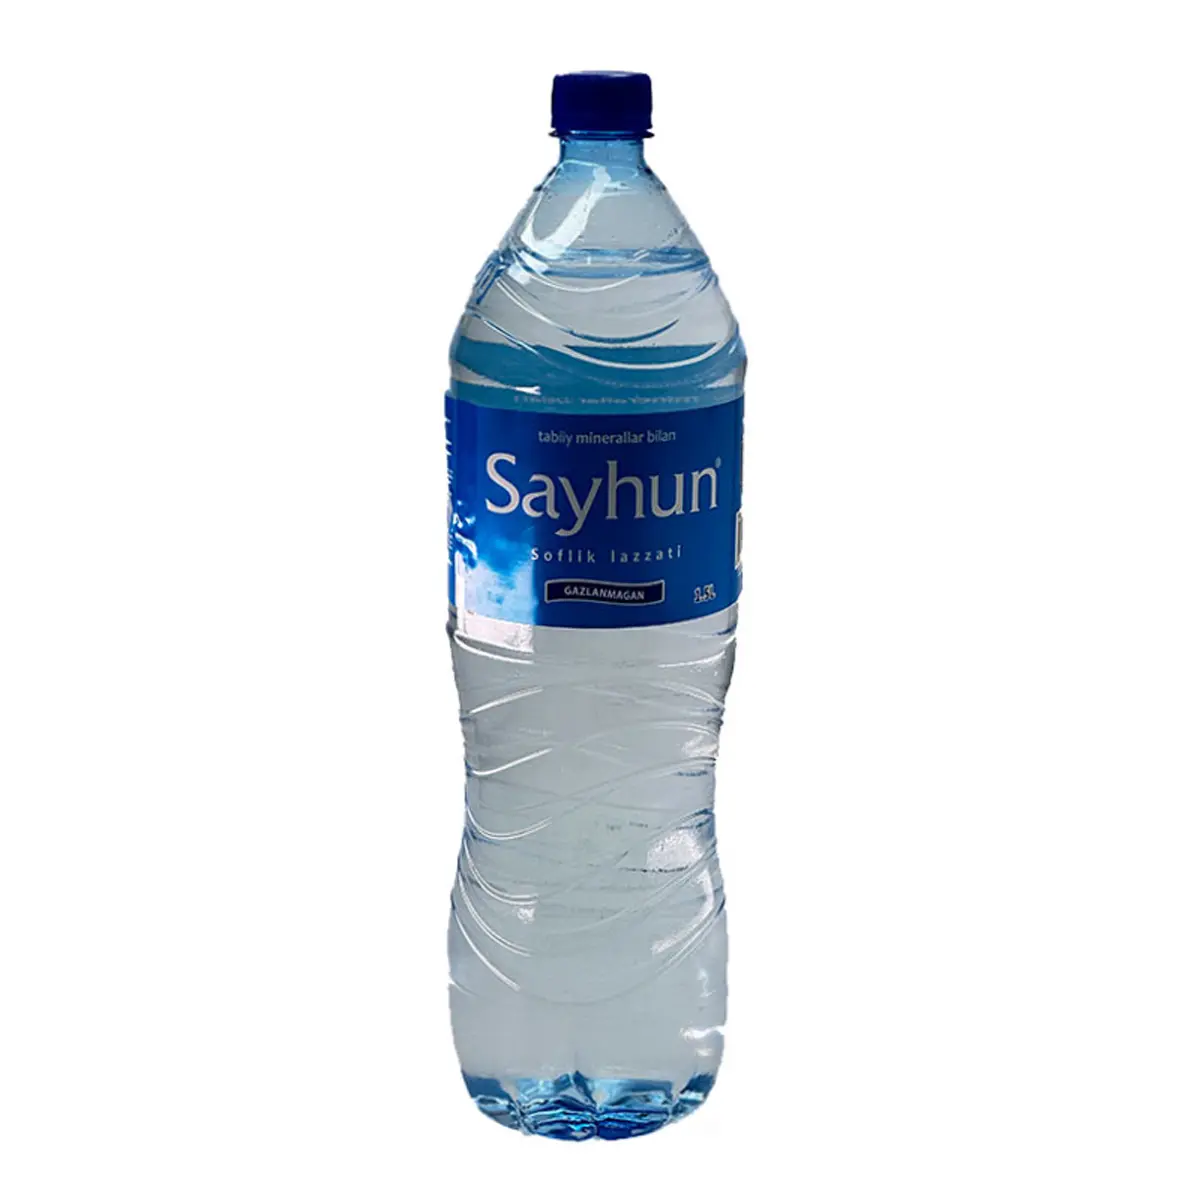 Quality clean water - 1,5 litre bottle natural product own production